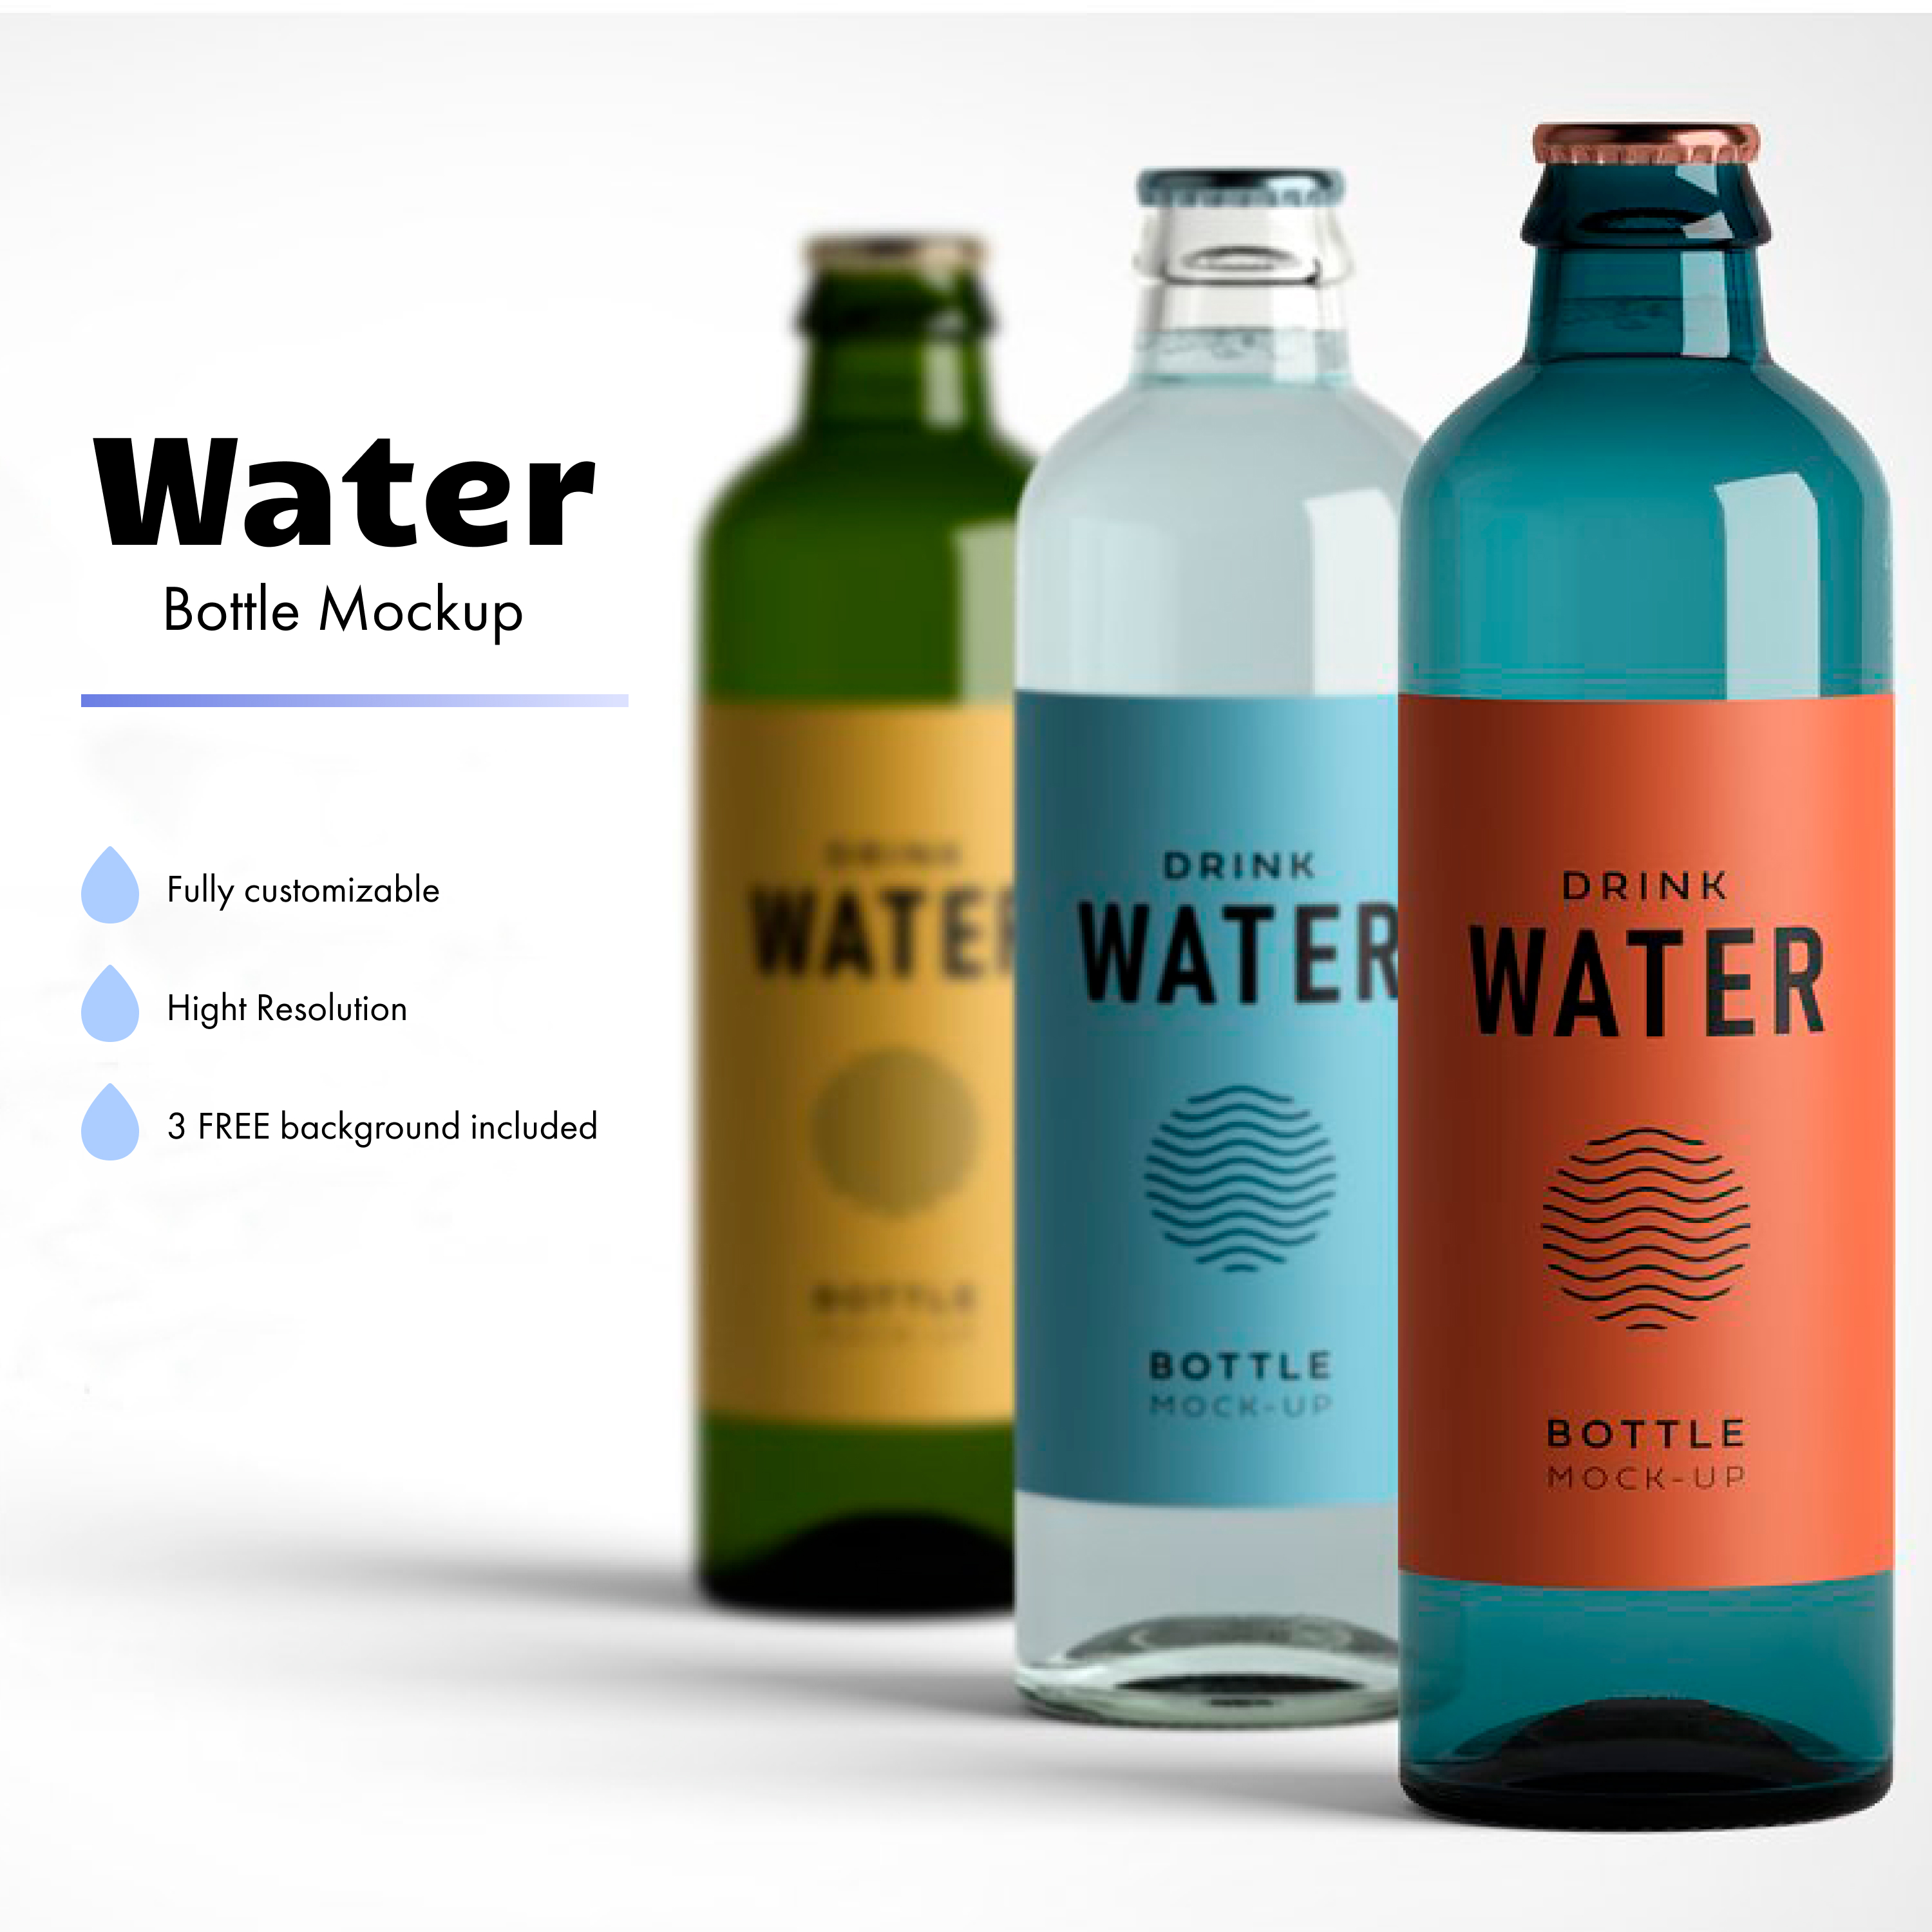 Prints of water bottles can mockup.